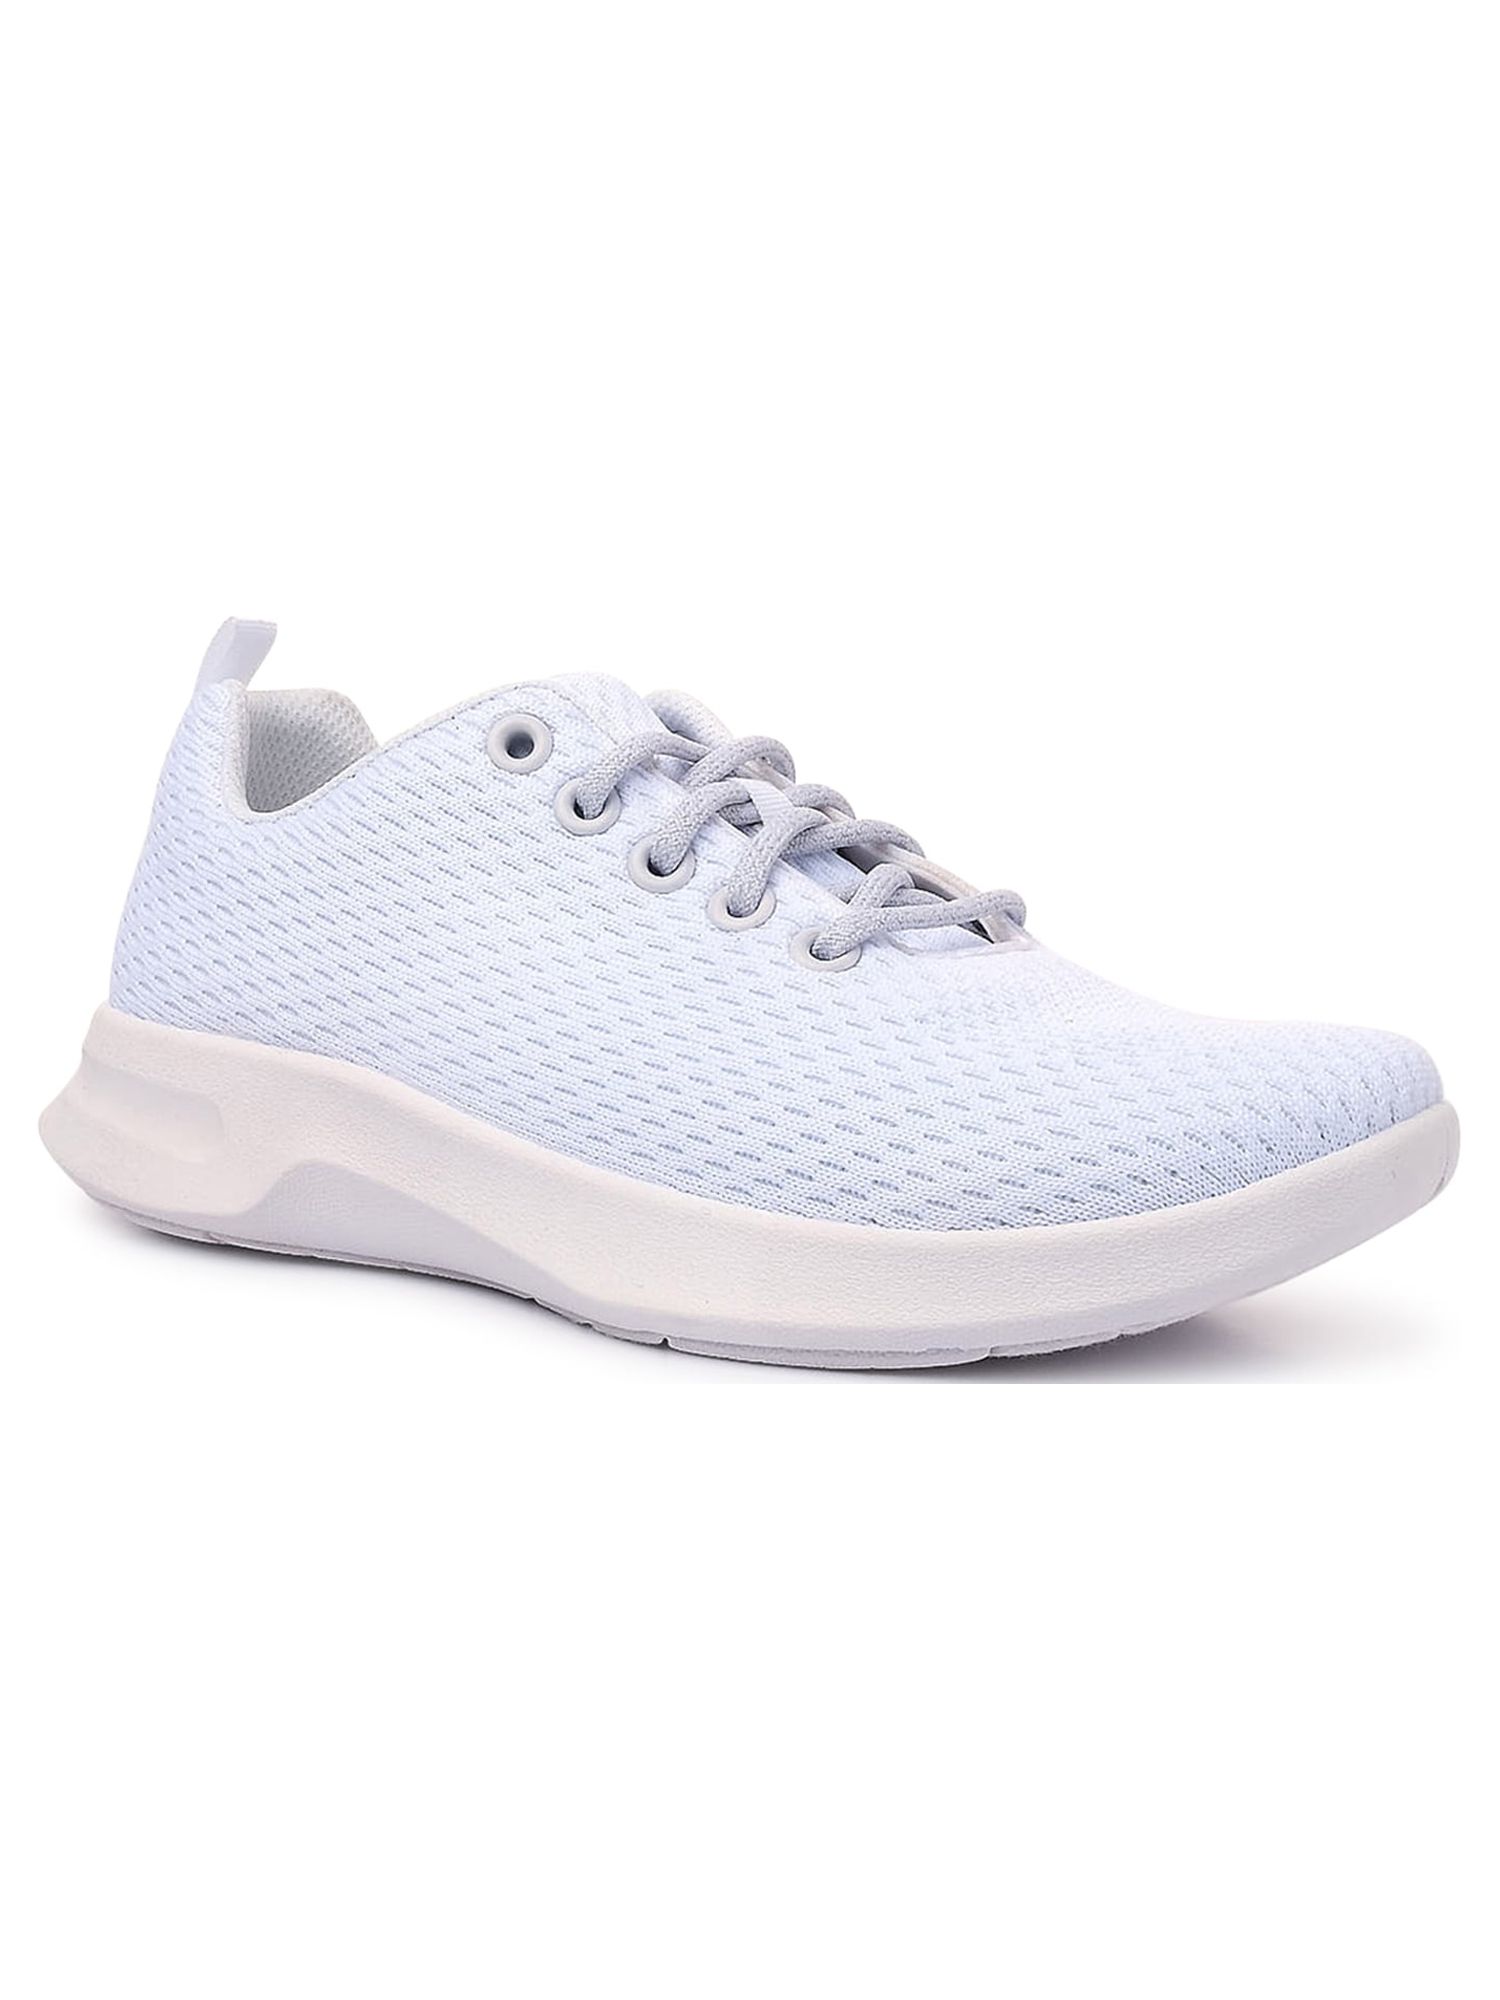 Athletic Works Women's Lifestyle Jogger Sneakers, Wide Width Available - image 1 of 5